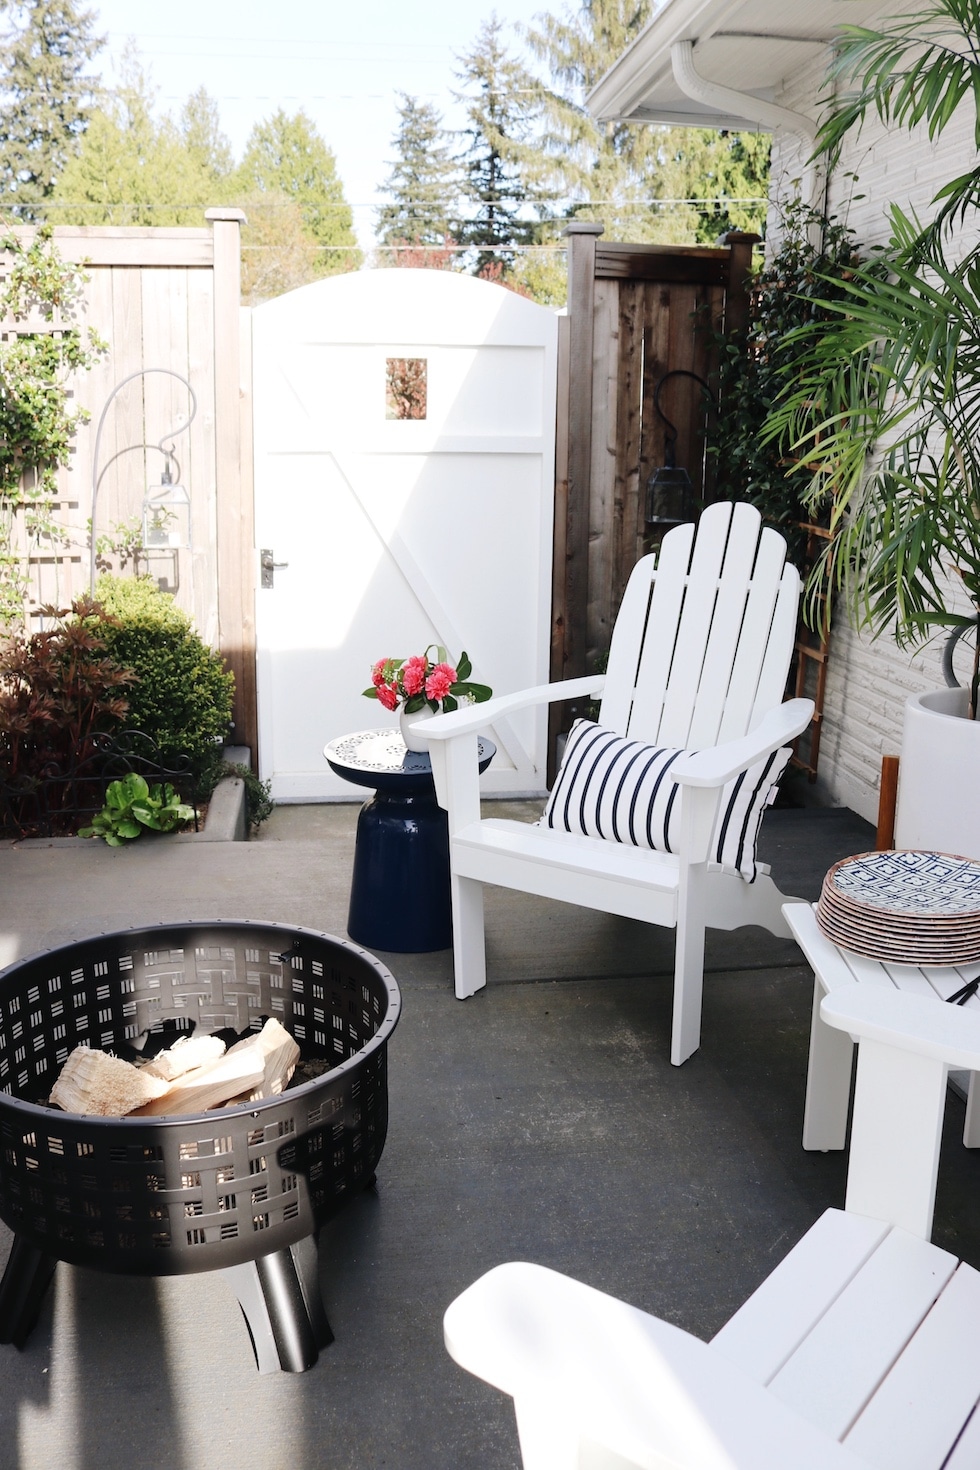 Deck Patio Refresh Outdoor, The Yard Outdoor Furniture Seabrook